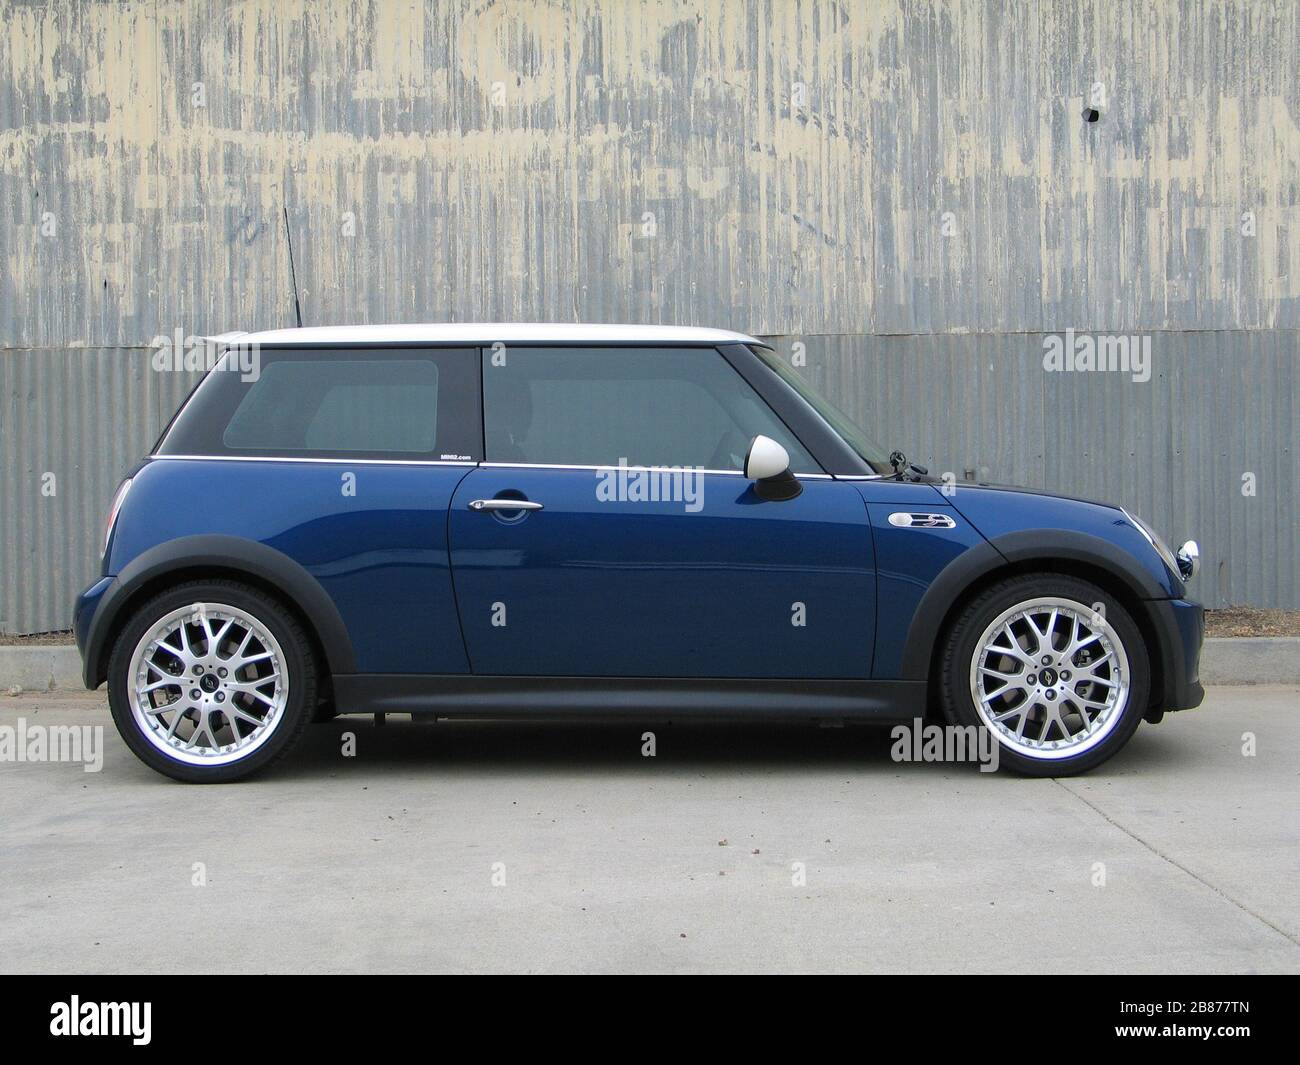 English: 2004 MINI Cooper S, indi blue with white roof; 18 October 2005  (original upload date); Transferred from en.wikipedia to Commons by Legoktm  using CommonsHelper.; Camelboy at English Wikipedia Stock Photo - Alamy